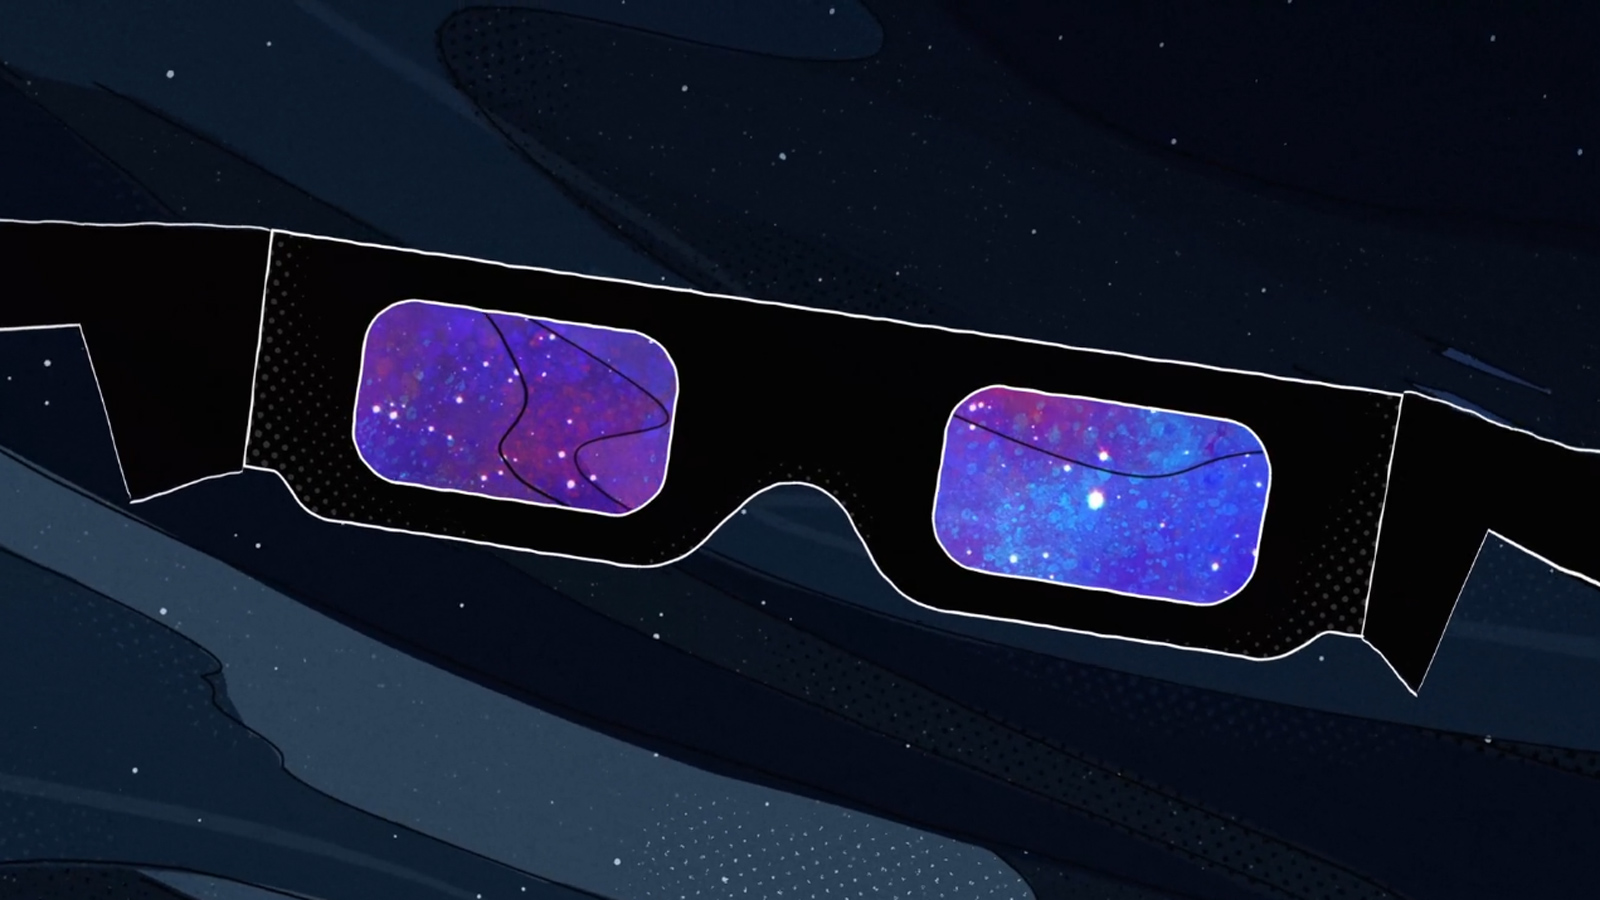 slide 5 - Fanciful image of "special glasses" allowing a view of exoplanets throughout the galaxy.